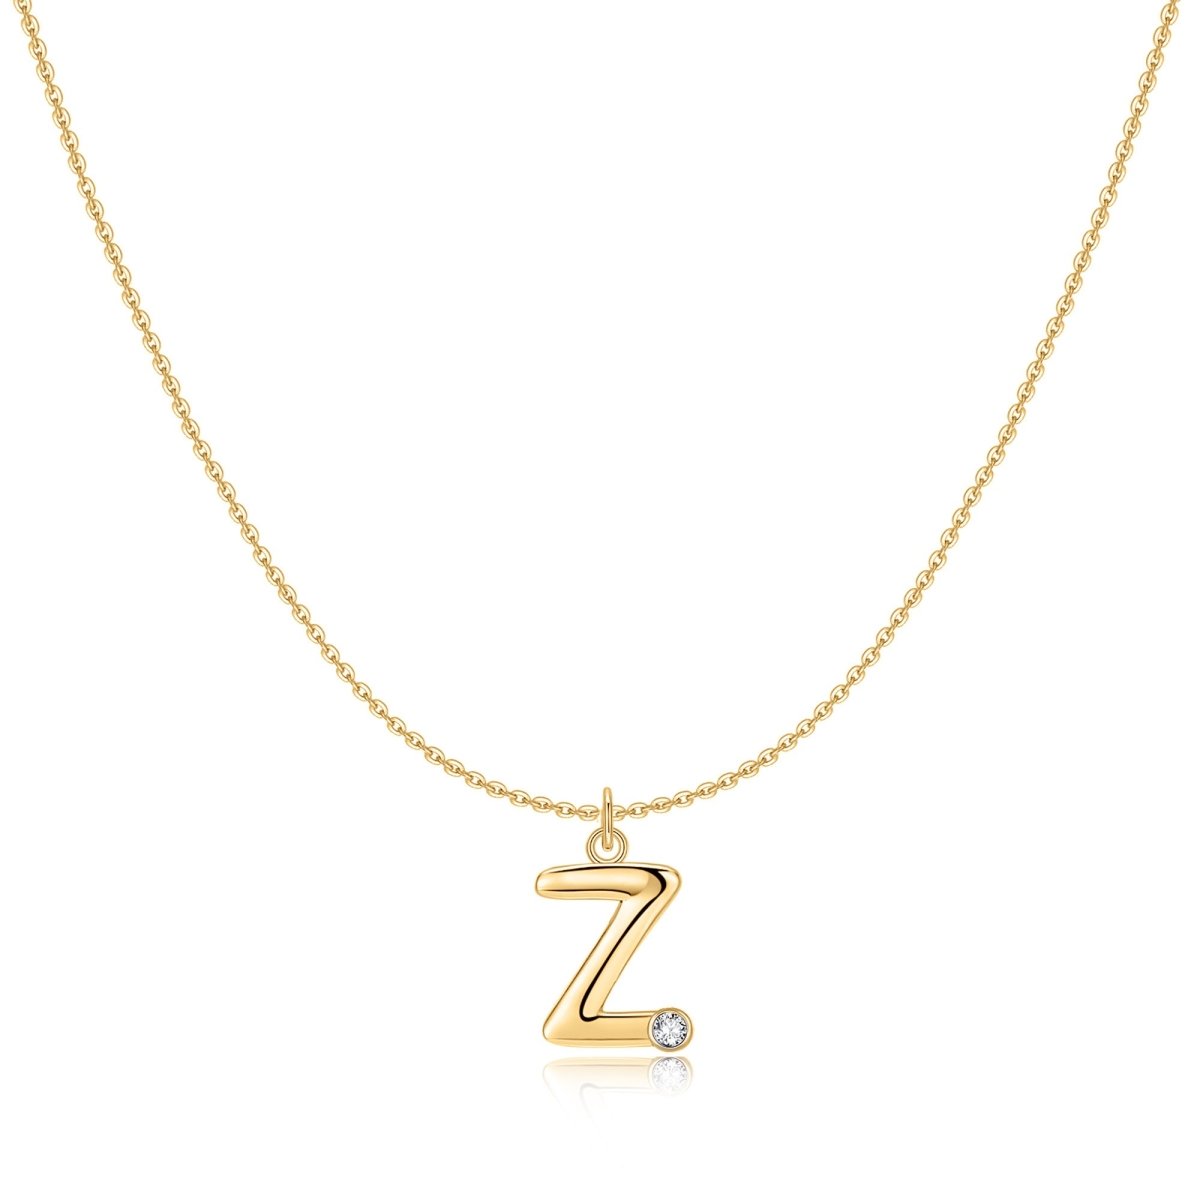 "Initial Glitter" Necklace - Milas Jewels Shop